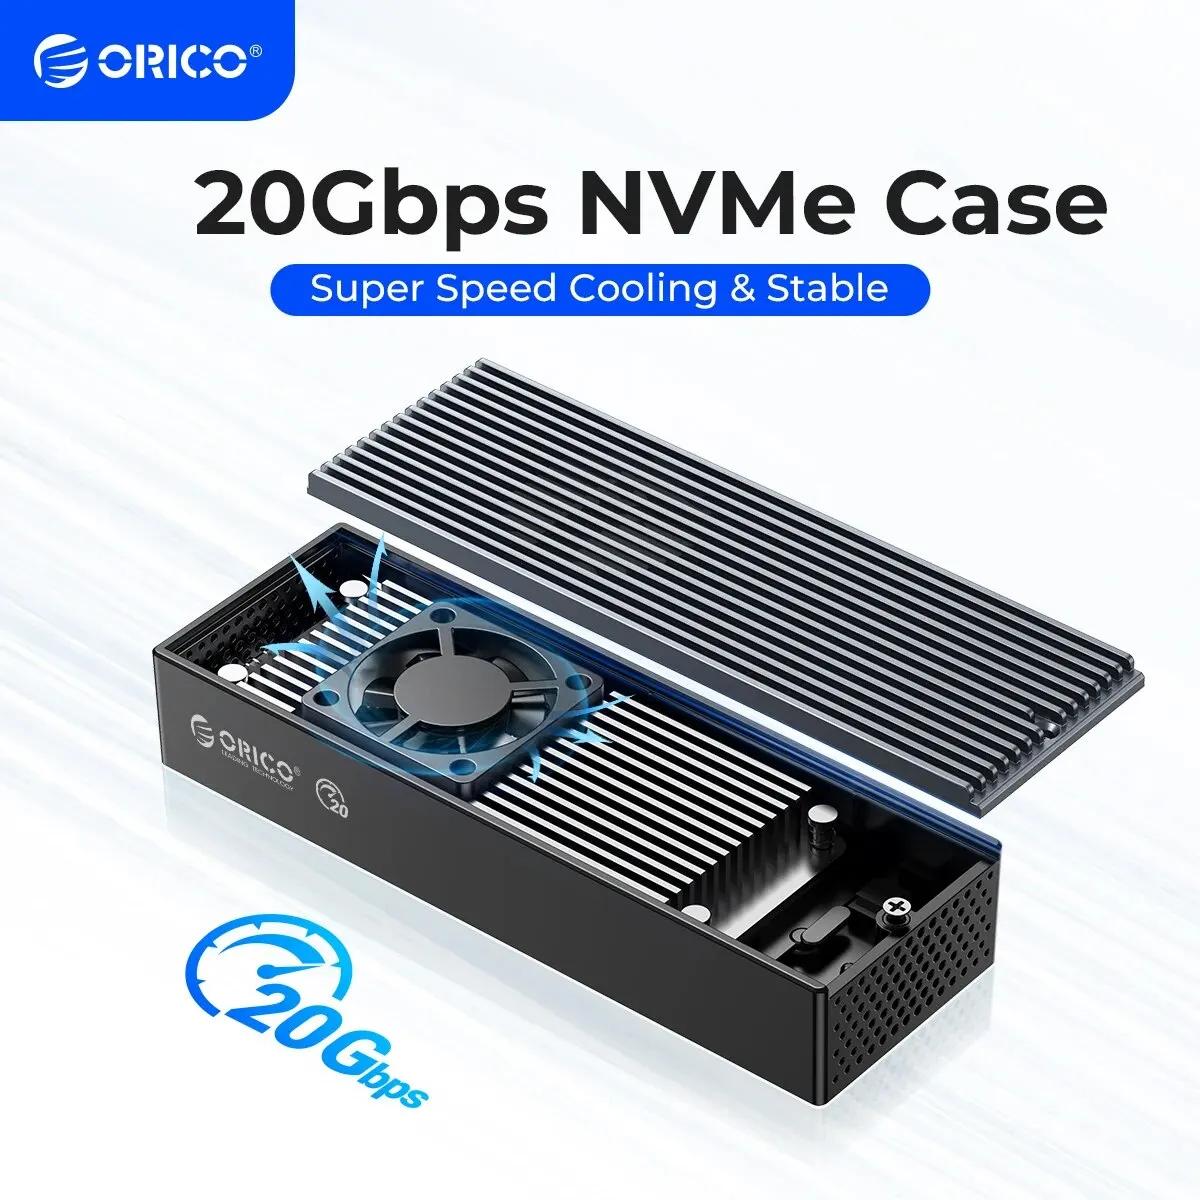 ORICO ð ǳ  M.2 NVME SSD ̽, M.2 NVME SSD Ŭ, M.2 NVME 2230 2242 2260 2280 SSD, 20Gbps